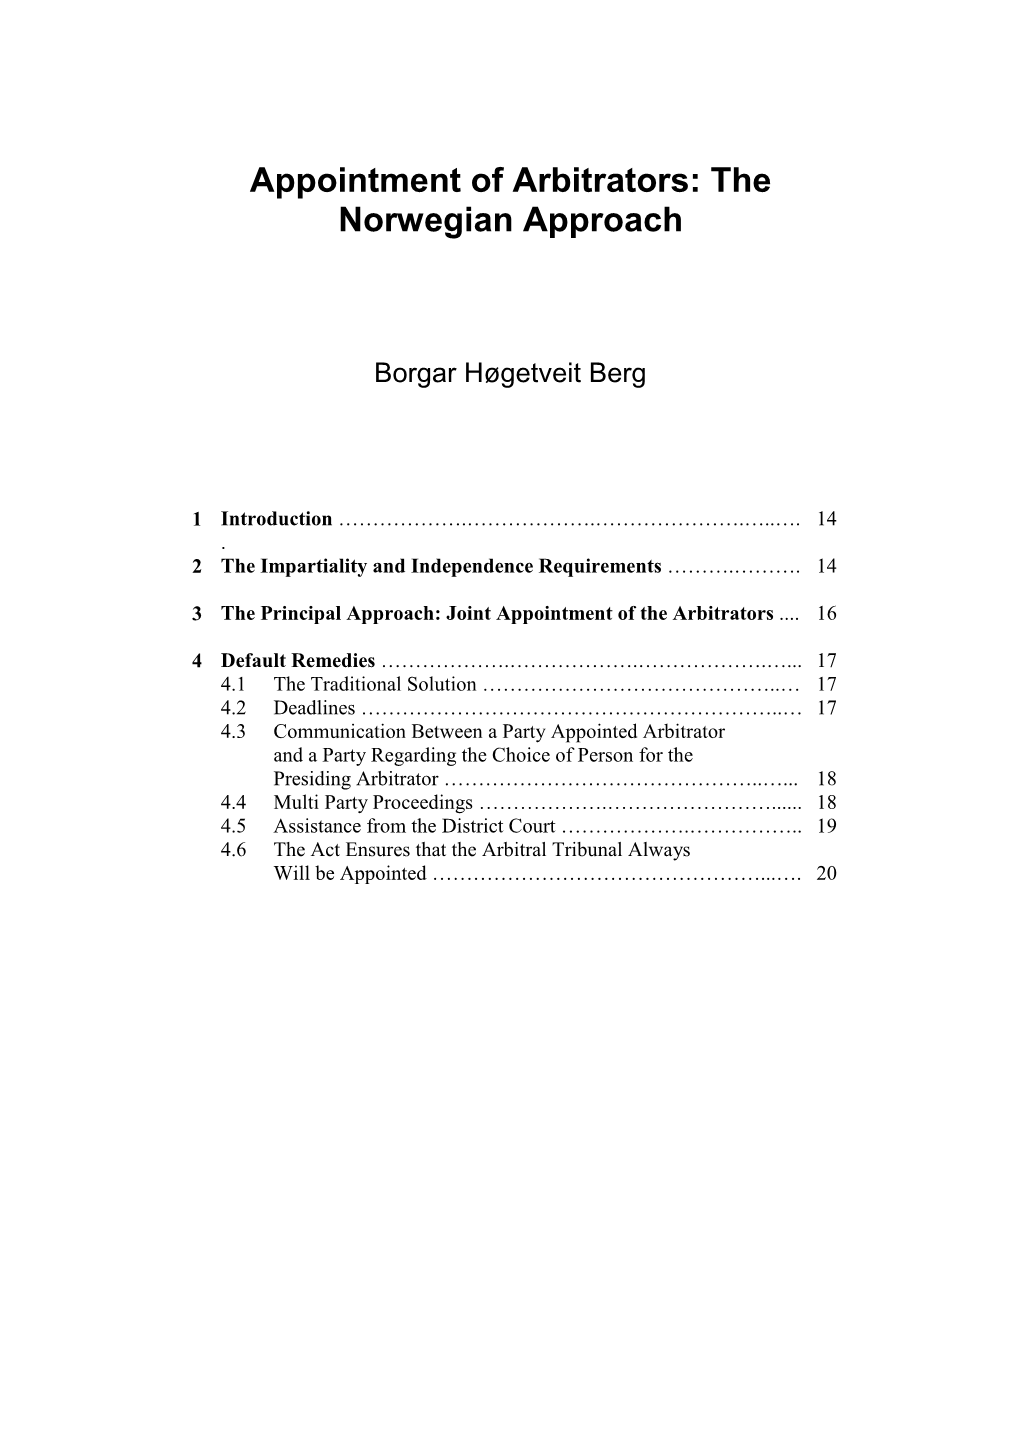 Appointment of Arbitrators: the Norwegian Approach